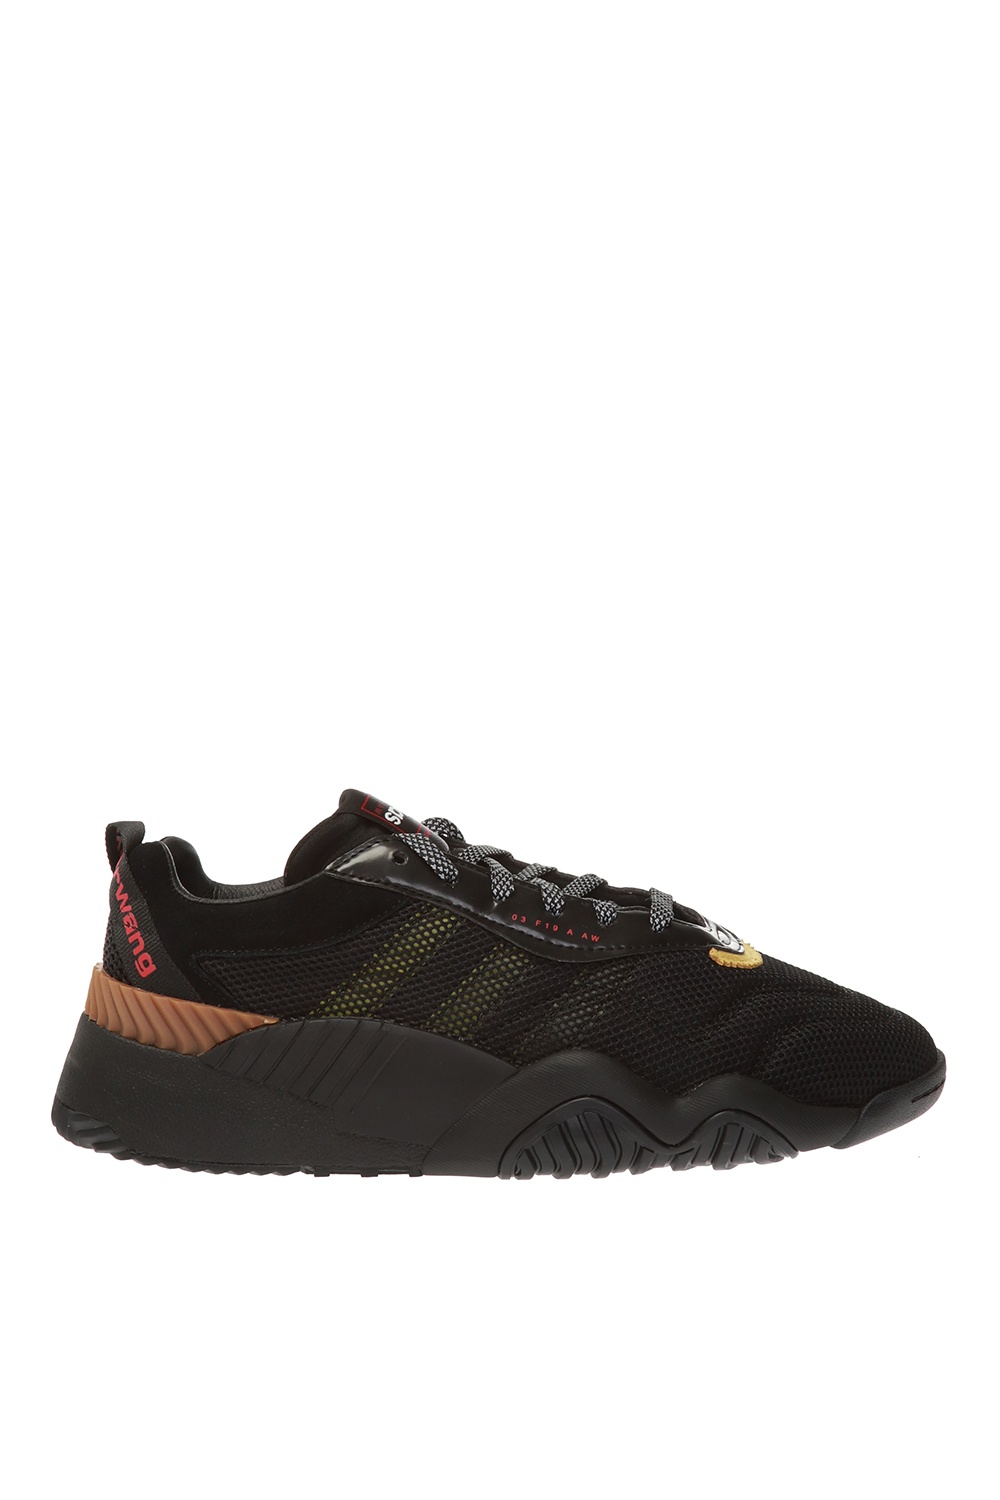 alexander wang turnout trainer